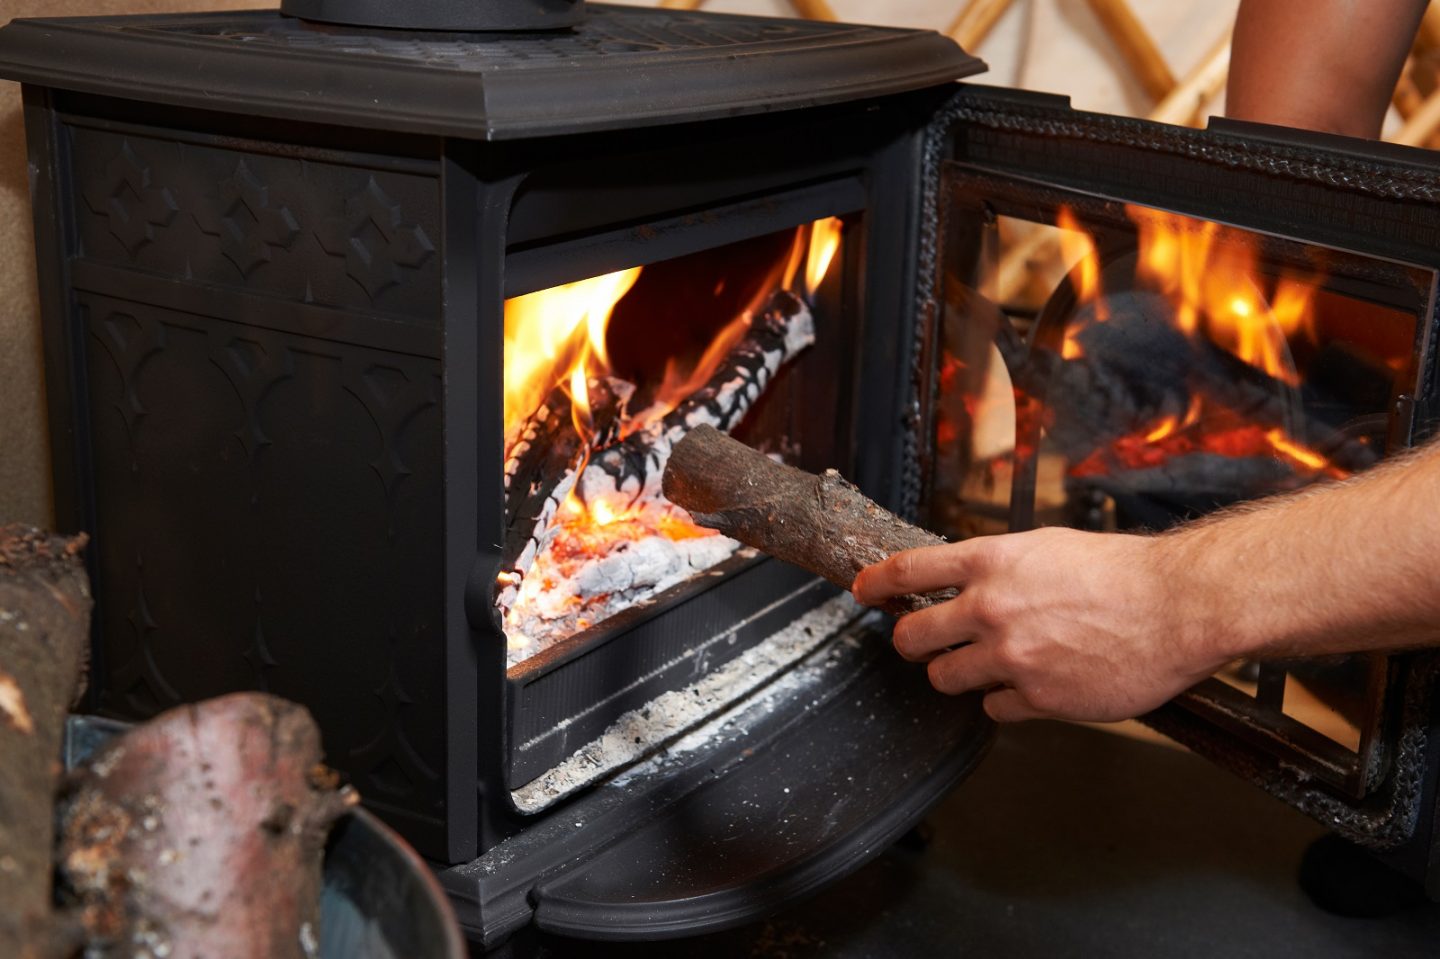 10 Wood Stove Safety Tips to Live By